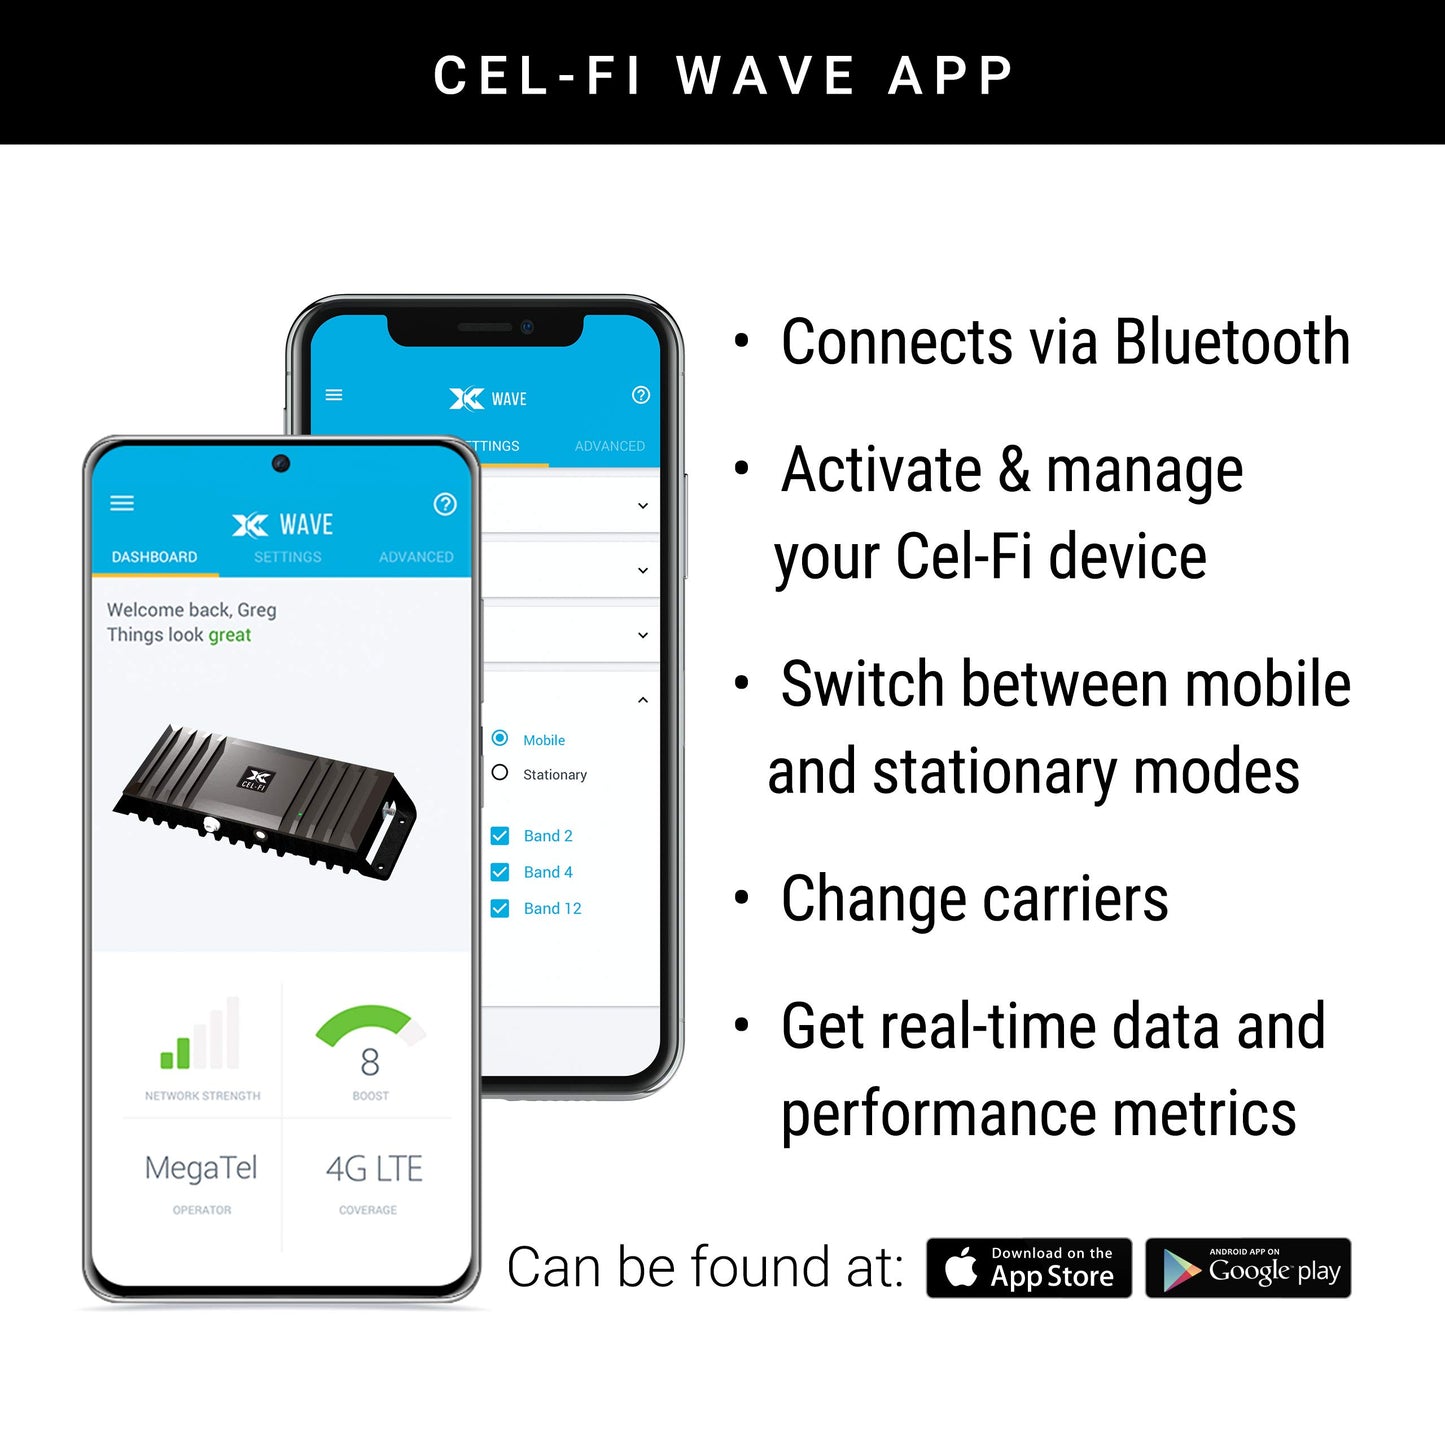 Cel-Fi GO Marine | Mobile Cellular Signal Booster for Commercial vessles, Leisure and Fishing Boats | Approved for use on All Major US Carriers